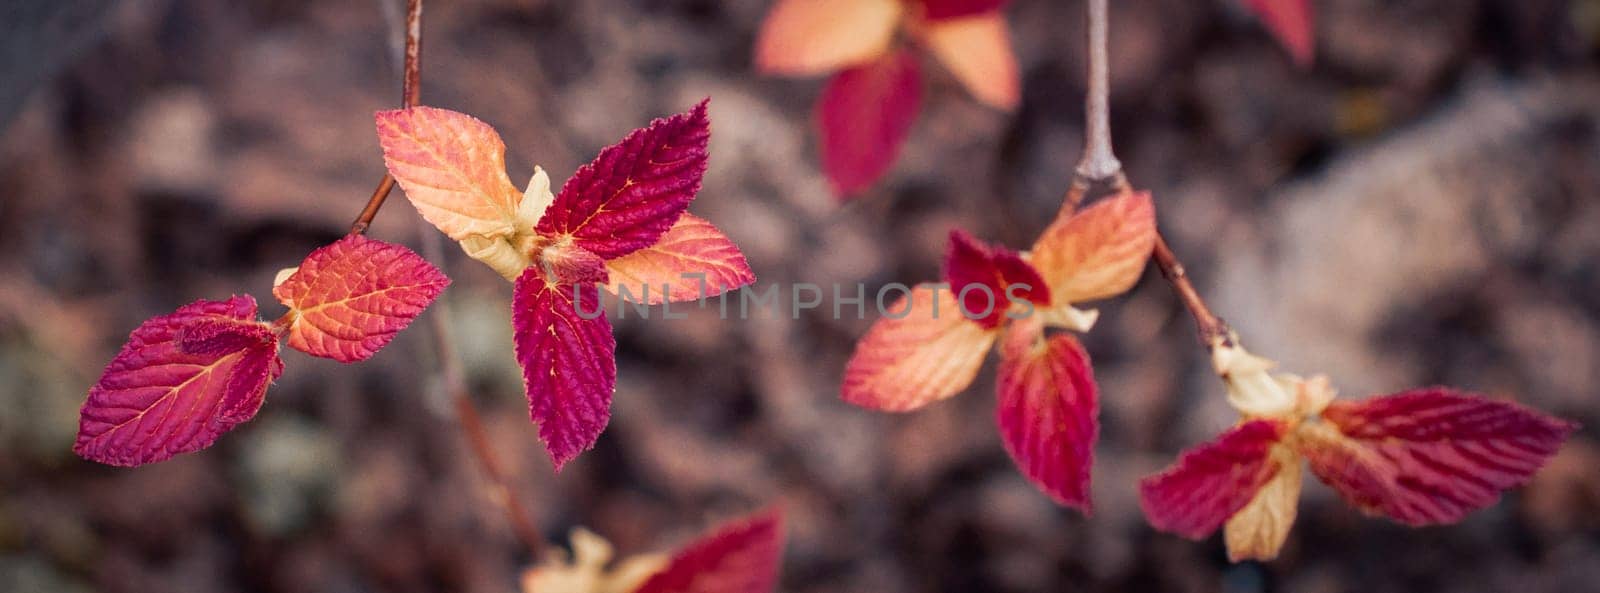 Close up twig with autumn leaves concept photo. Young branches, stems in springtime. by _Nataly_Nati_